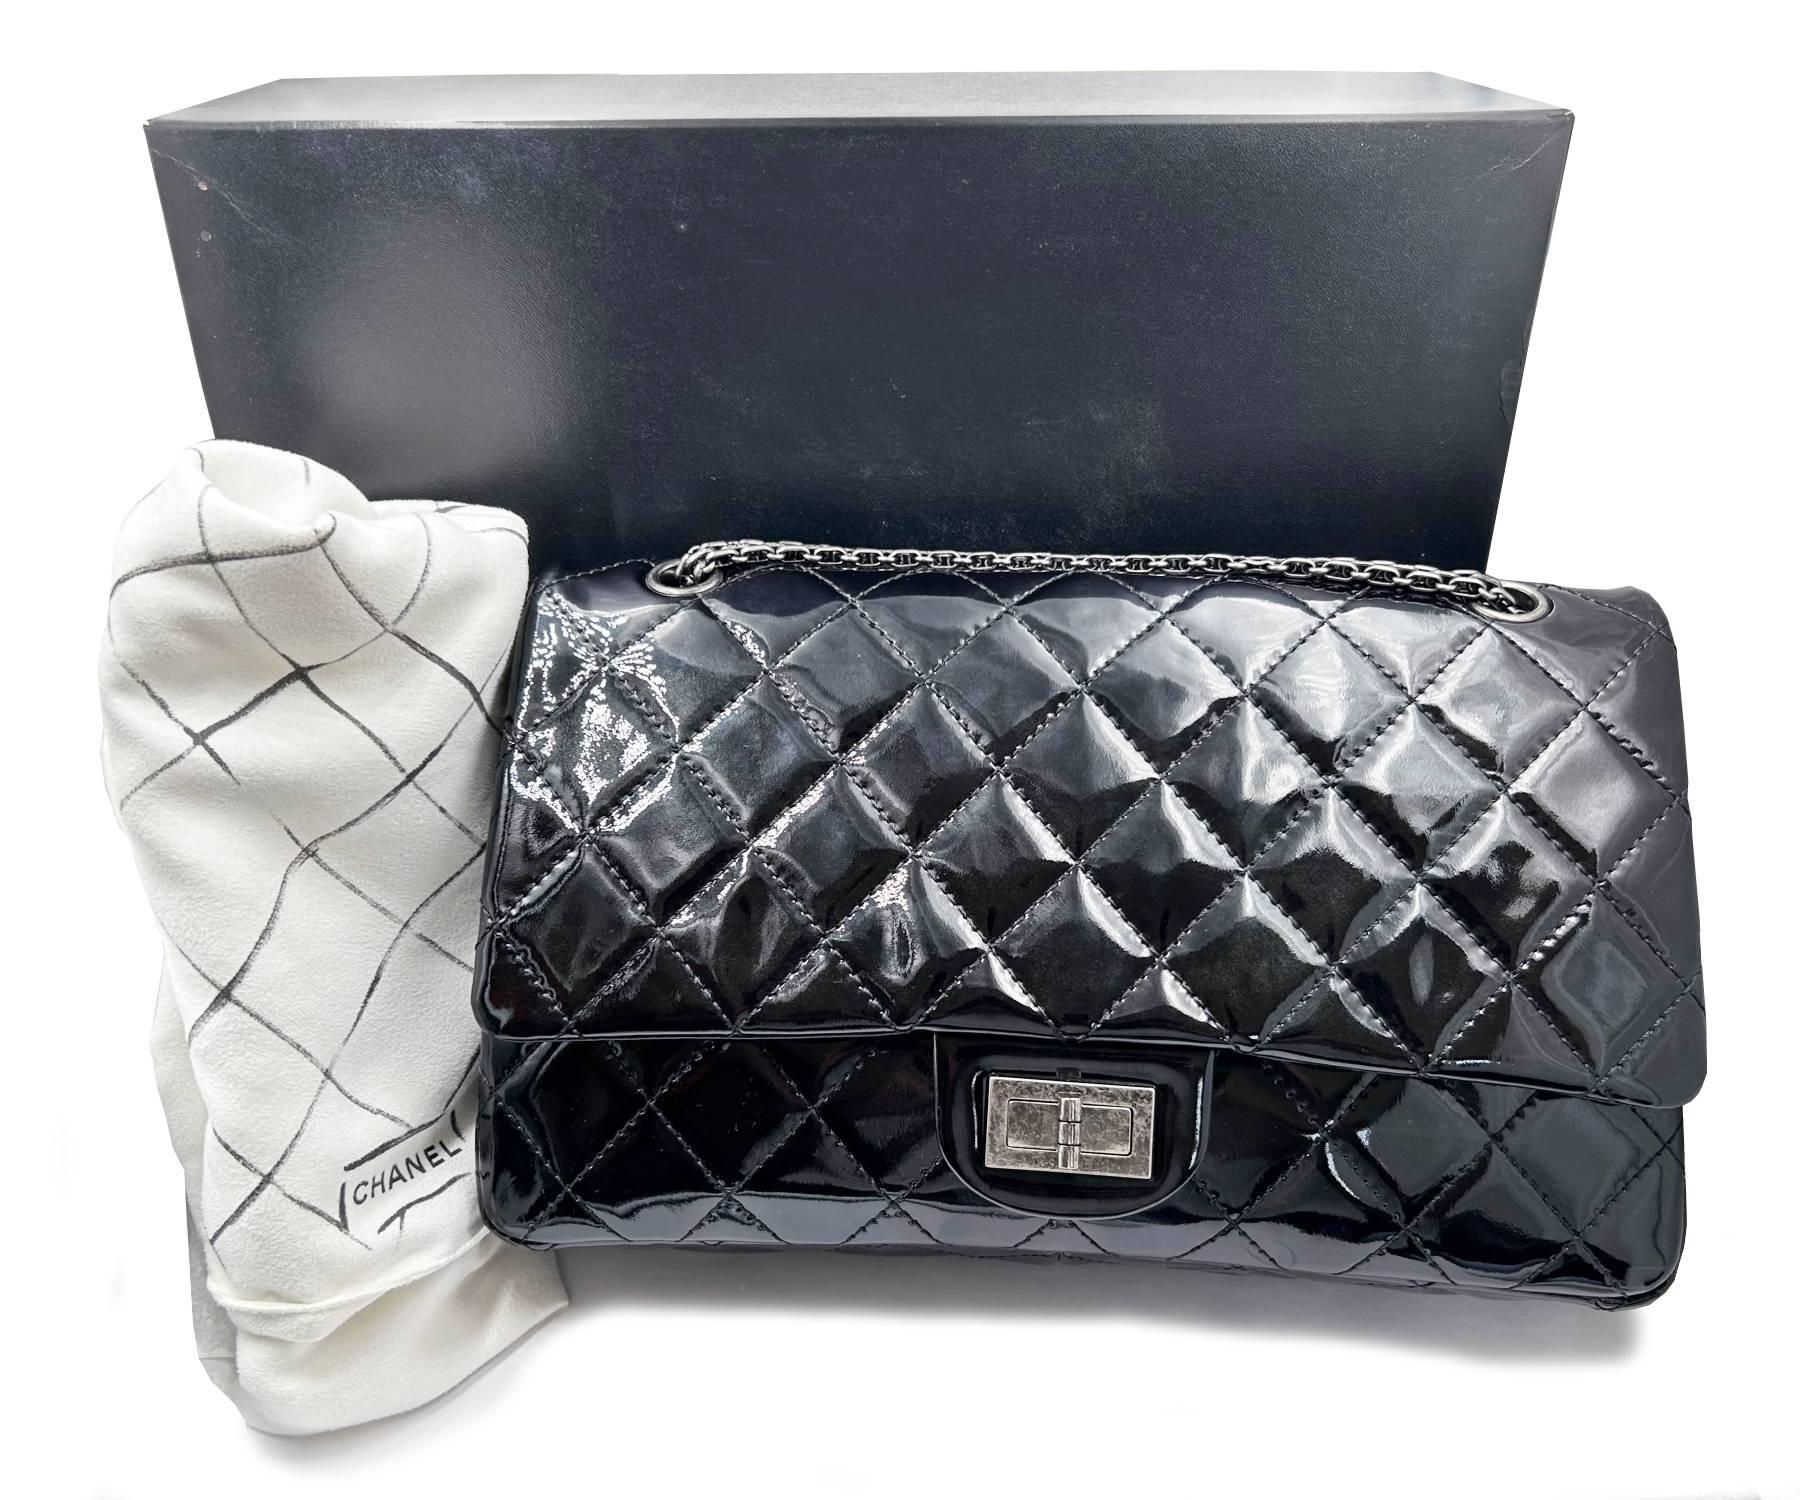 Chanel Black Patent Leather Ruthenium Hardware 2.55 Jumbo Shoulder Bag

*Marked 1455 xxxx
*Made in Italy
*Comes with original box and dustbag
*Ruthenium hardware

-It's approximately 12.25